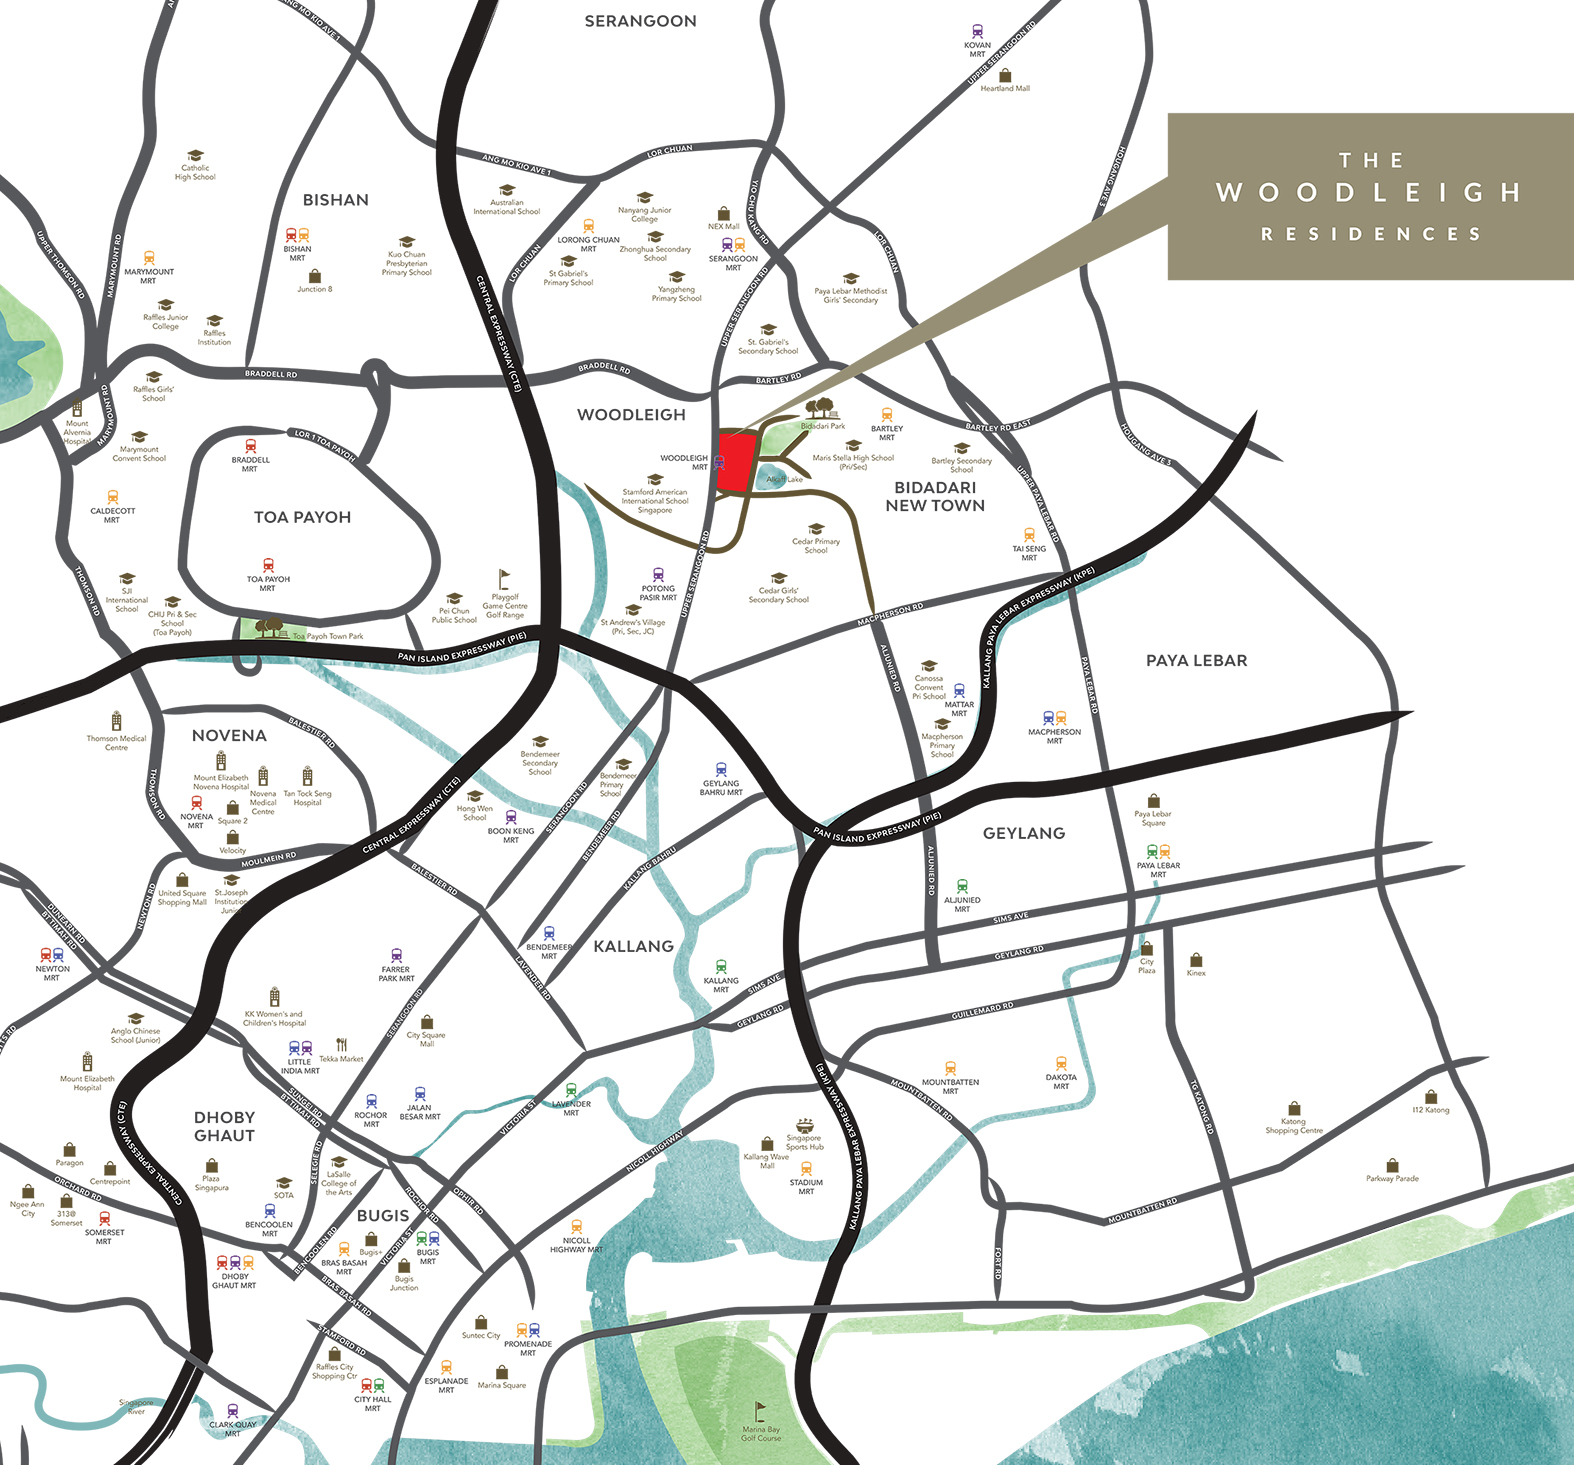 The Woodleigh Residences LOCATION MAP